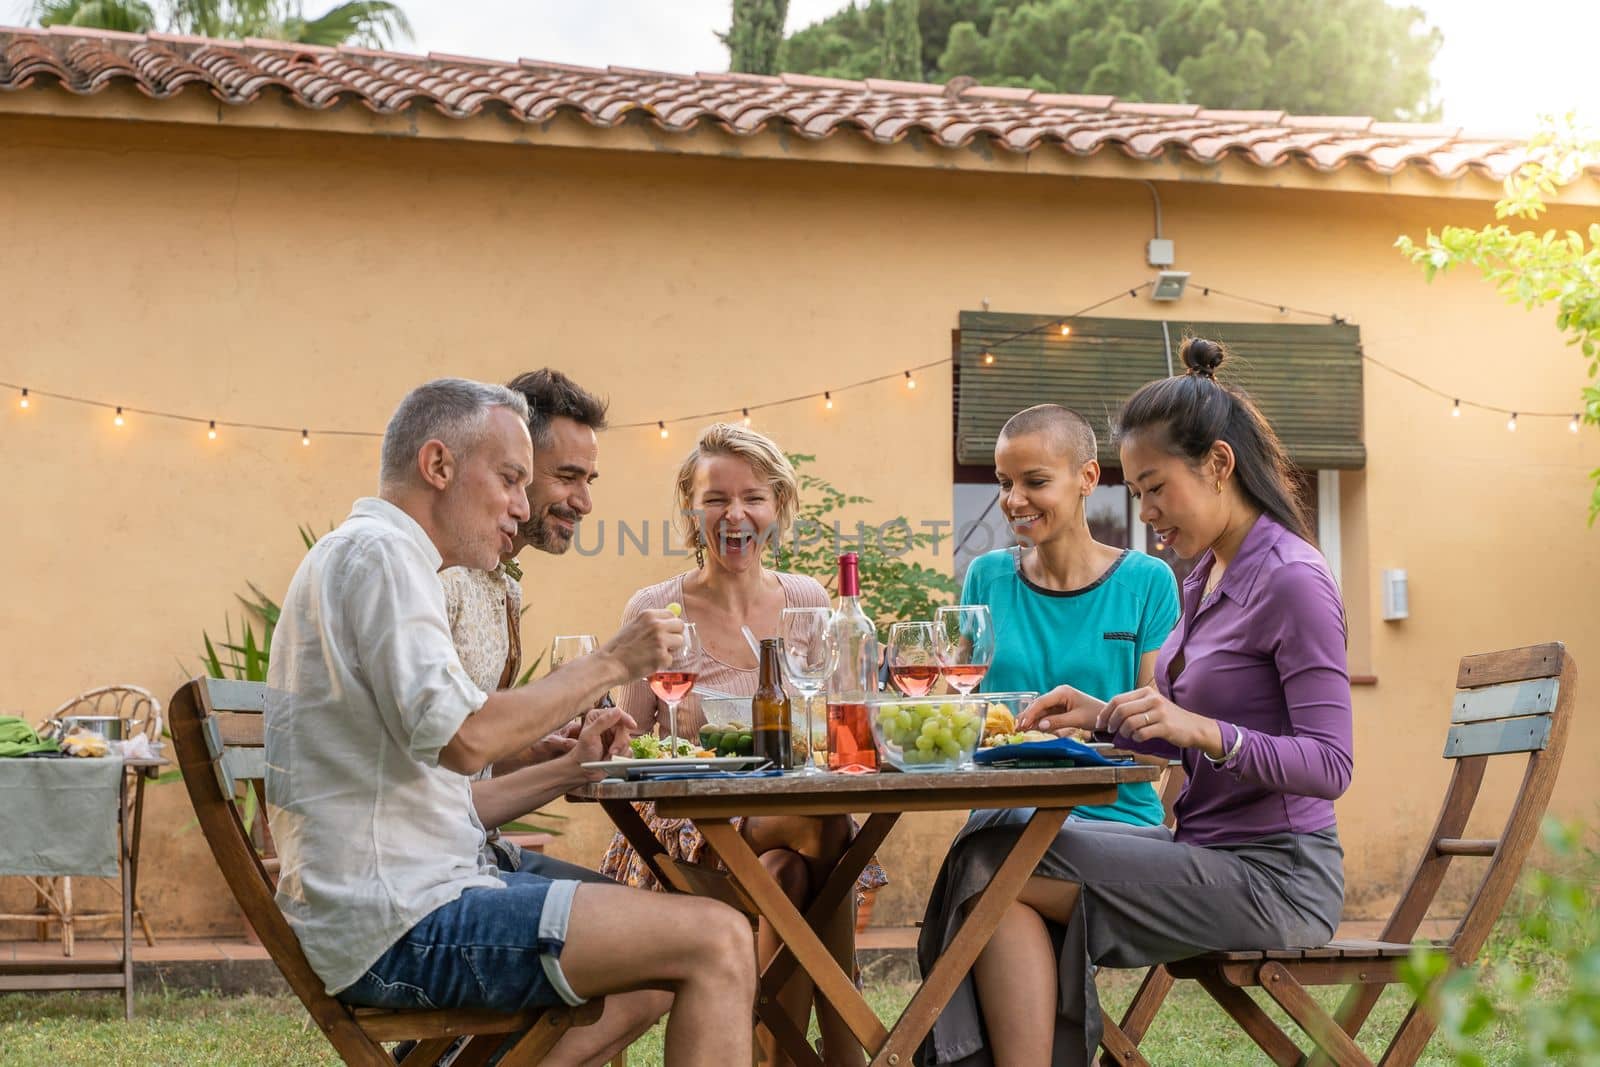 Happy middle-aged men and women eating healthy food at country house picnic. Lifestyle concept with cheerful friends having fun together in afternoon relaxation time.